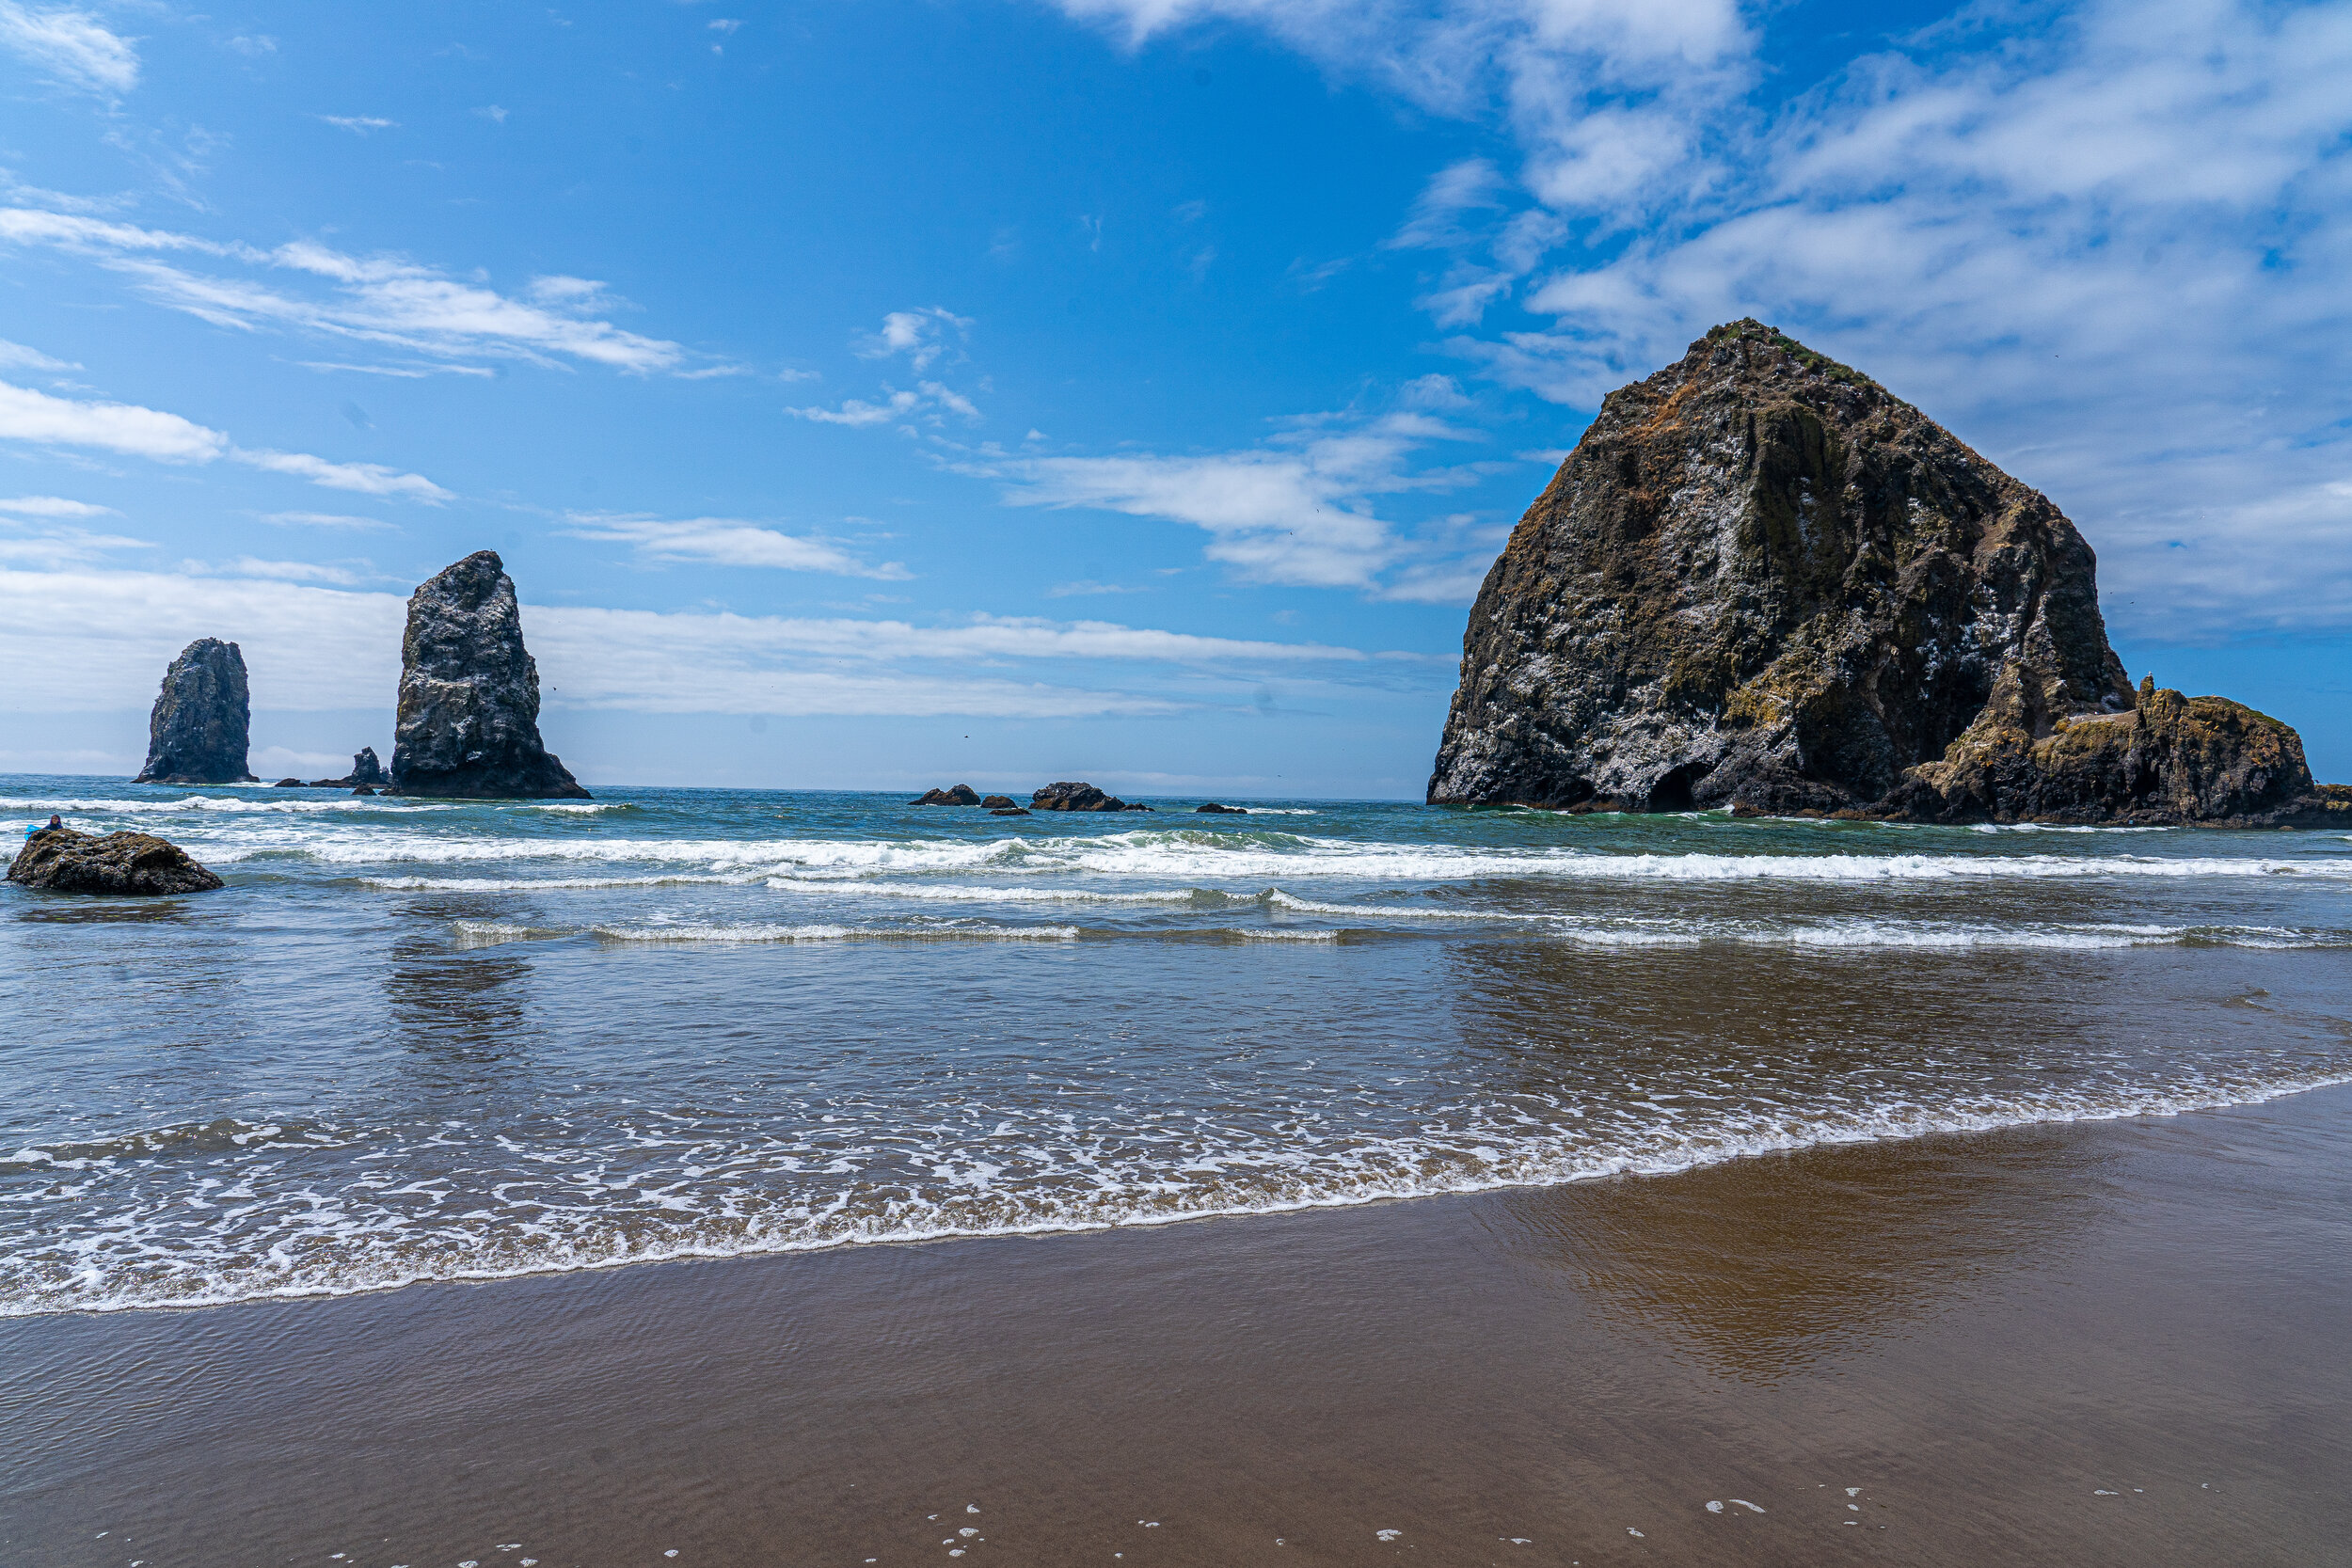  At  Cannon Beach , we saw our first haystack rock out in the water. While this may be a familiar scene on the west coast, we were pretty impressed! We had lunch at a brewery that was also a  hardware store,  thus their name,   Screw and Brew   .  Th